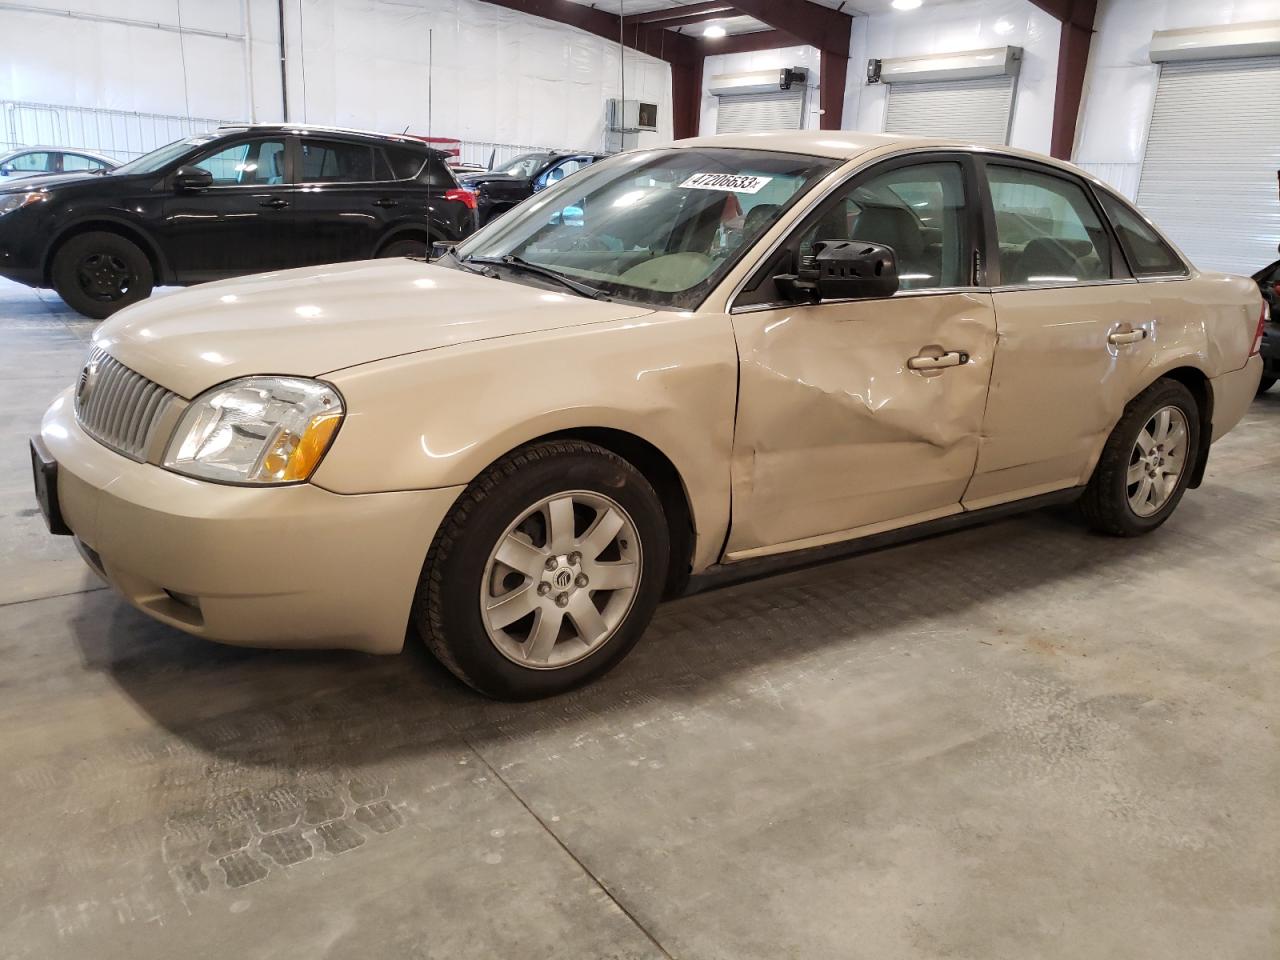 2007 Mercury Montego Luxury for sale at Copart Avon, MN Lot #47206*** |  SalvageReseller.com